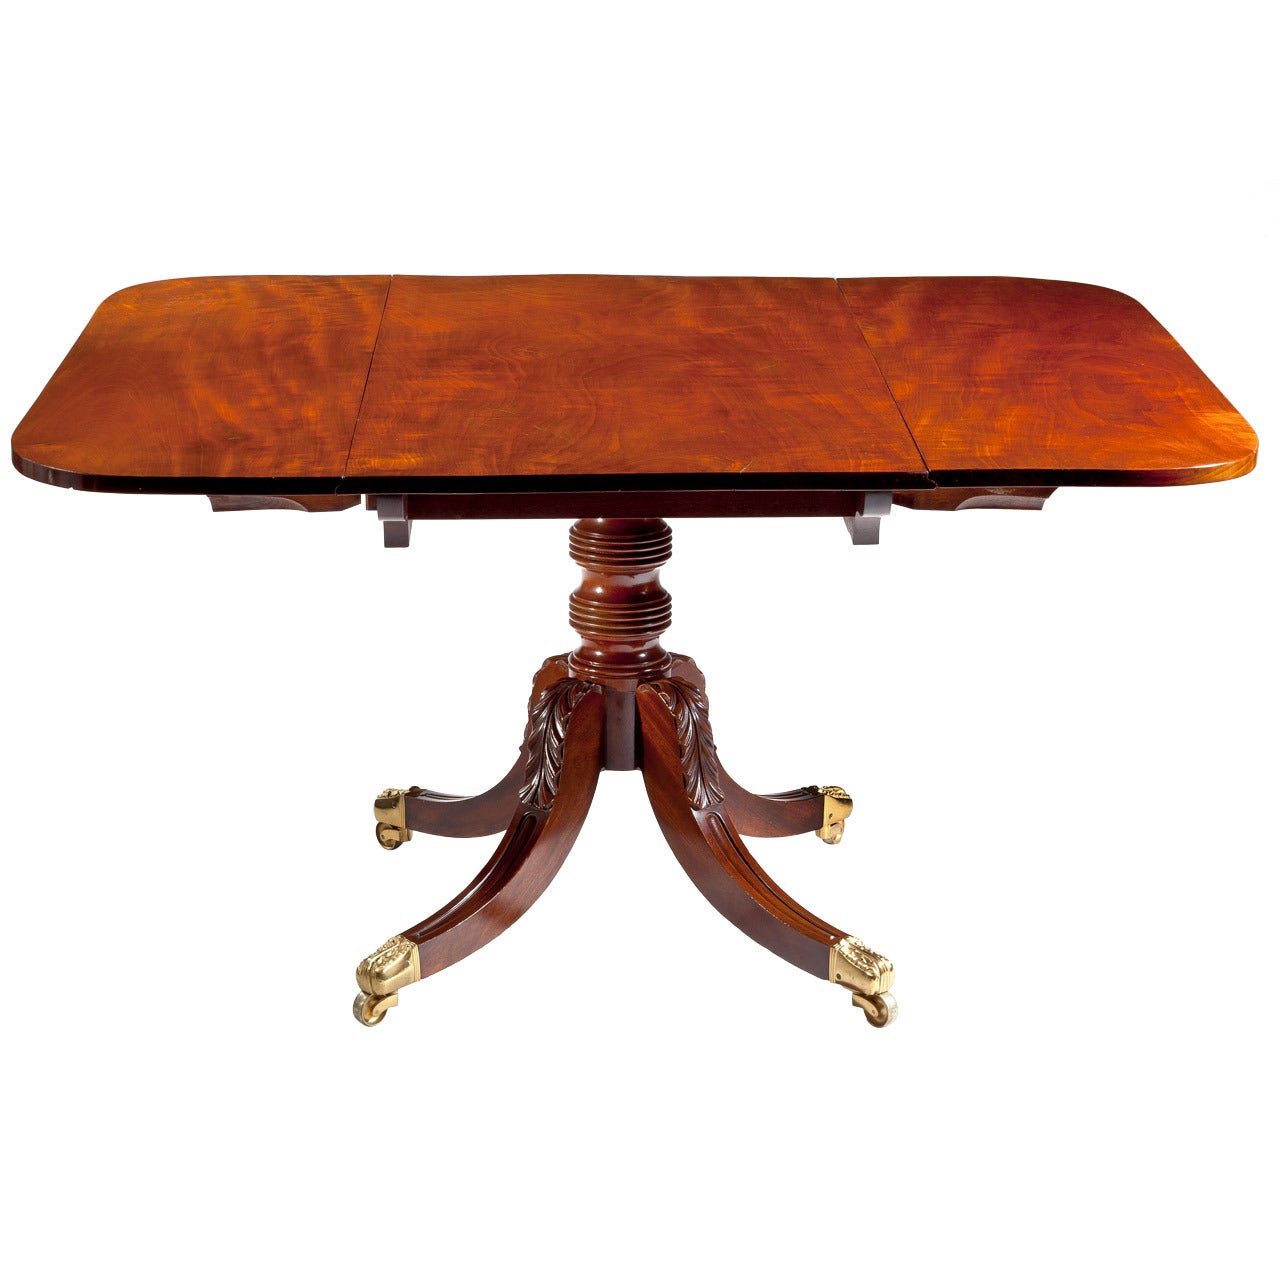 Sheraton Carved Mahogany Drop-Leaf Dining Table, circa 1820 For Sale